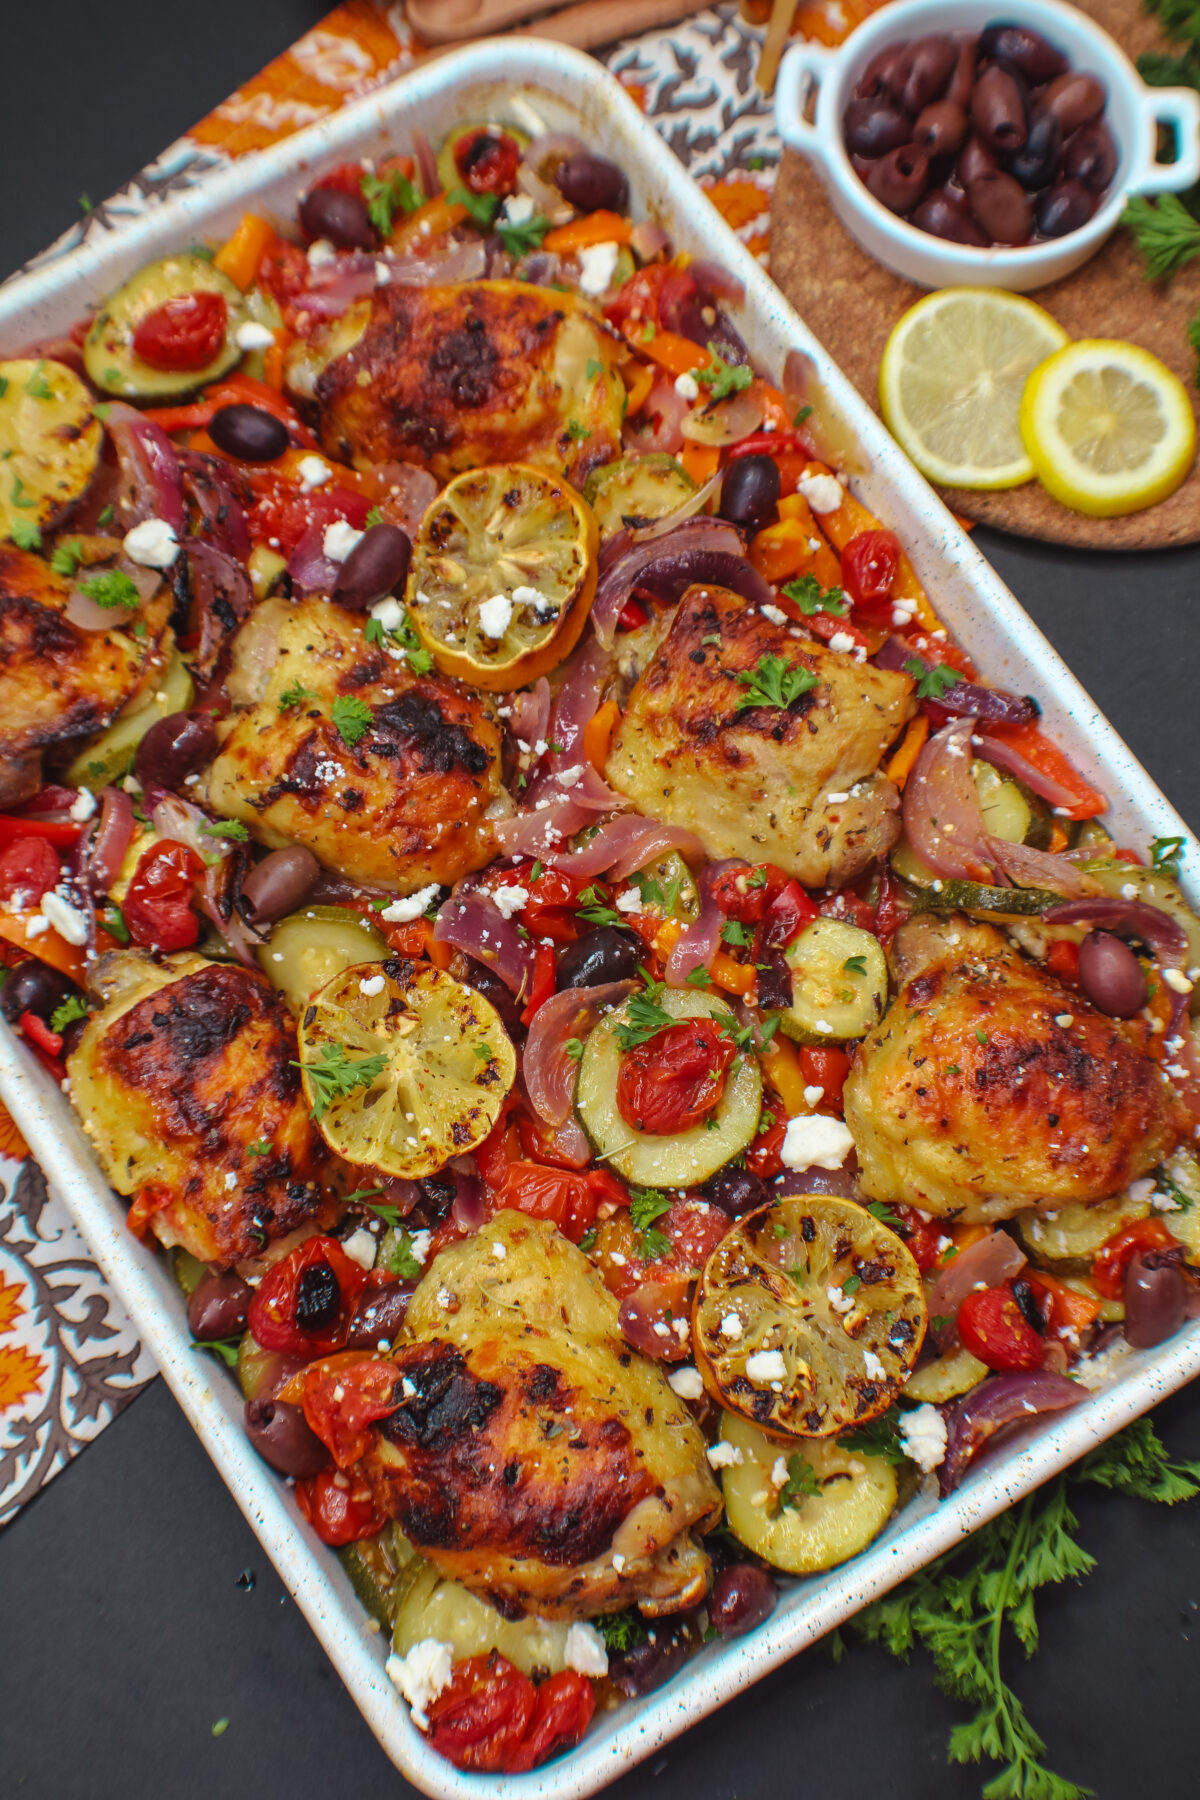 Get your family's mealtime sorted with this easy and flavourful Greek chicken sheet pan dinner recipe - the perfect meal for busy weeknights!